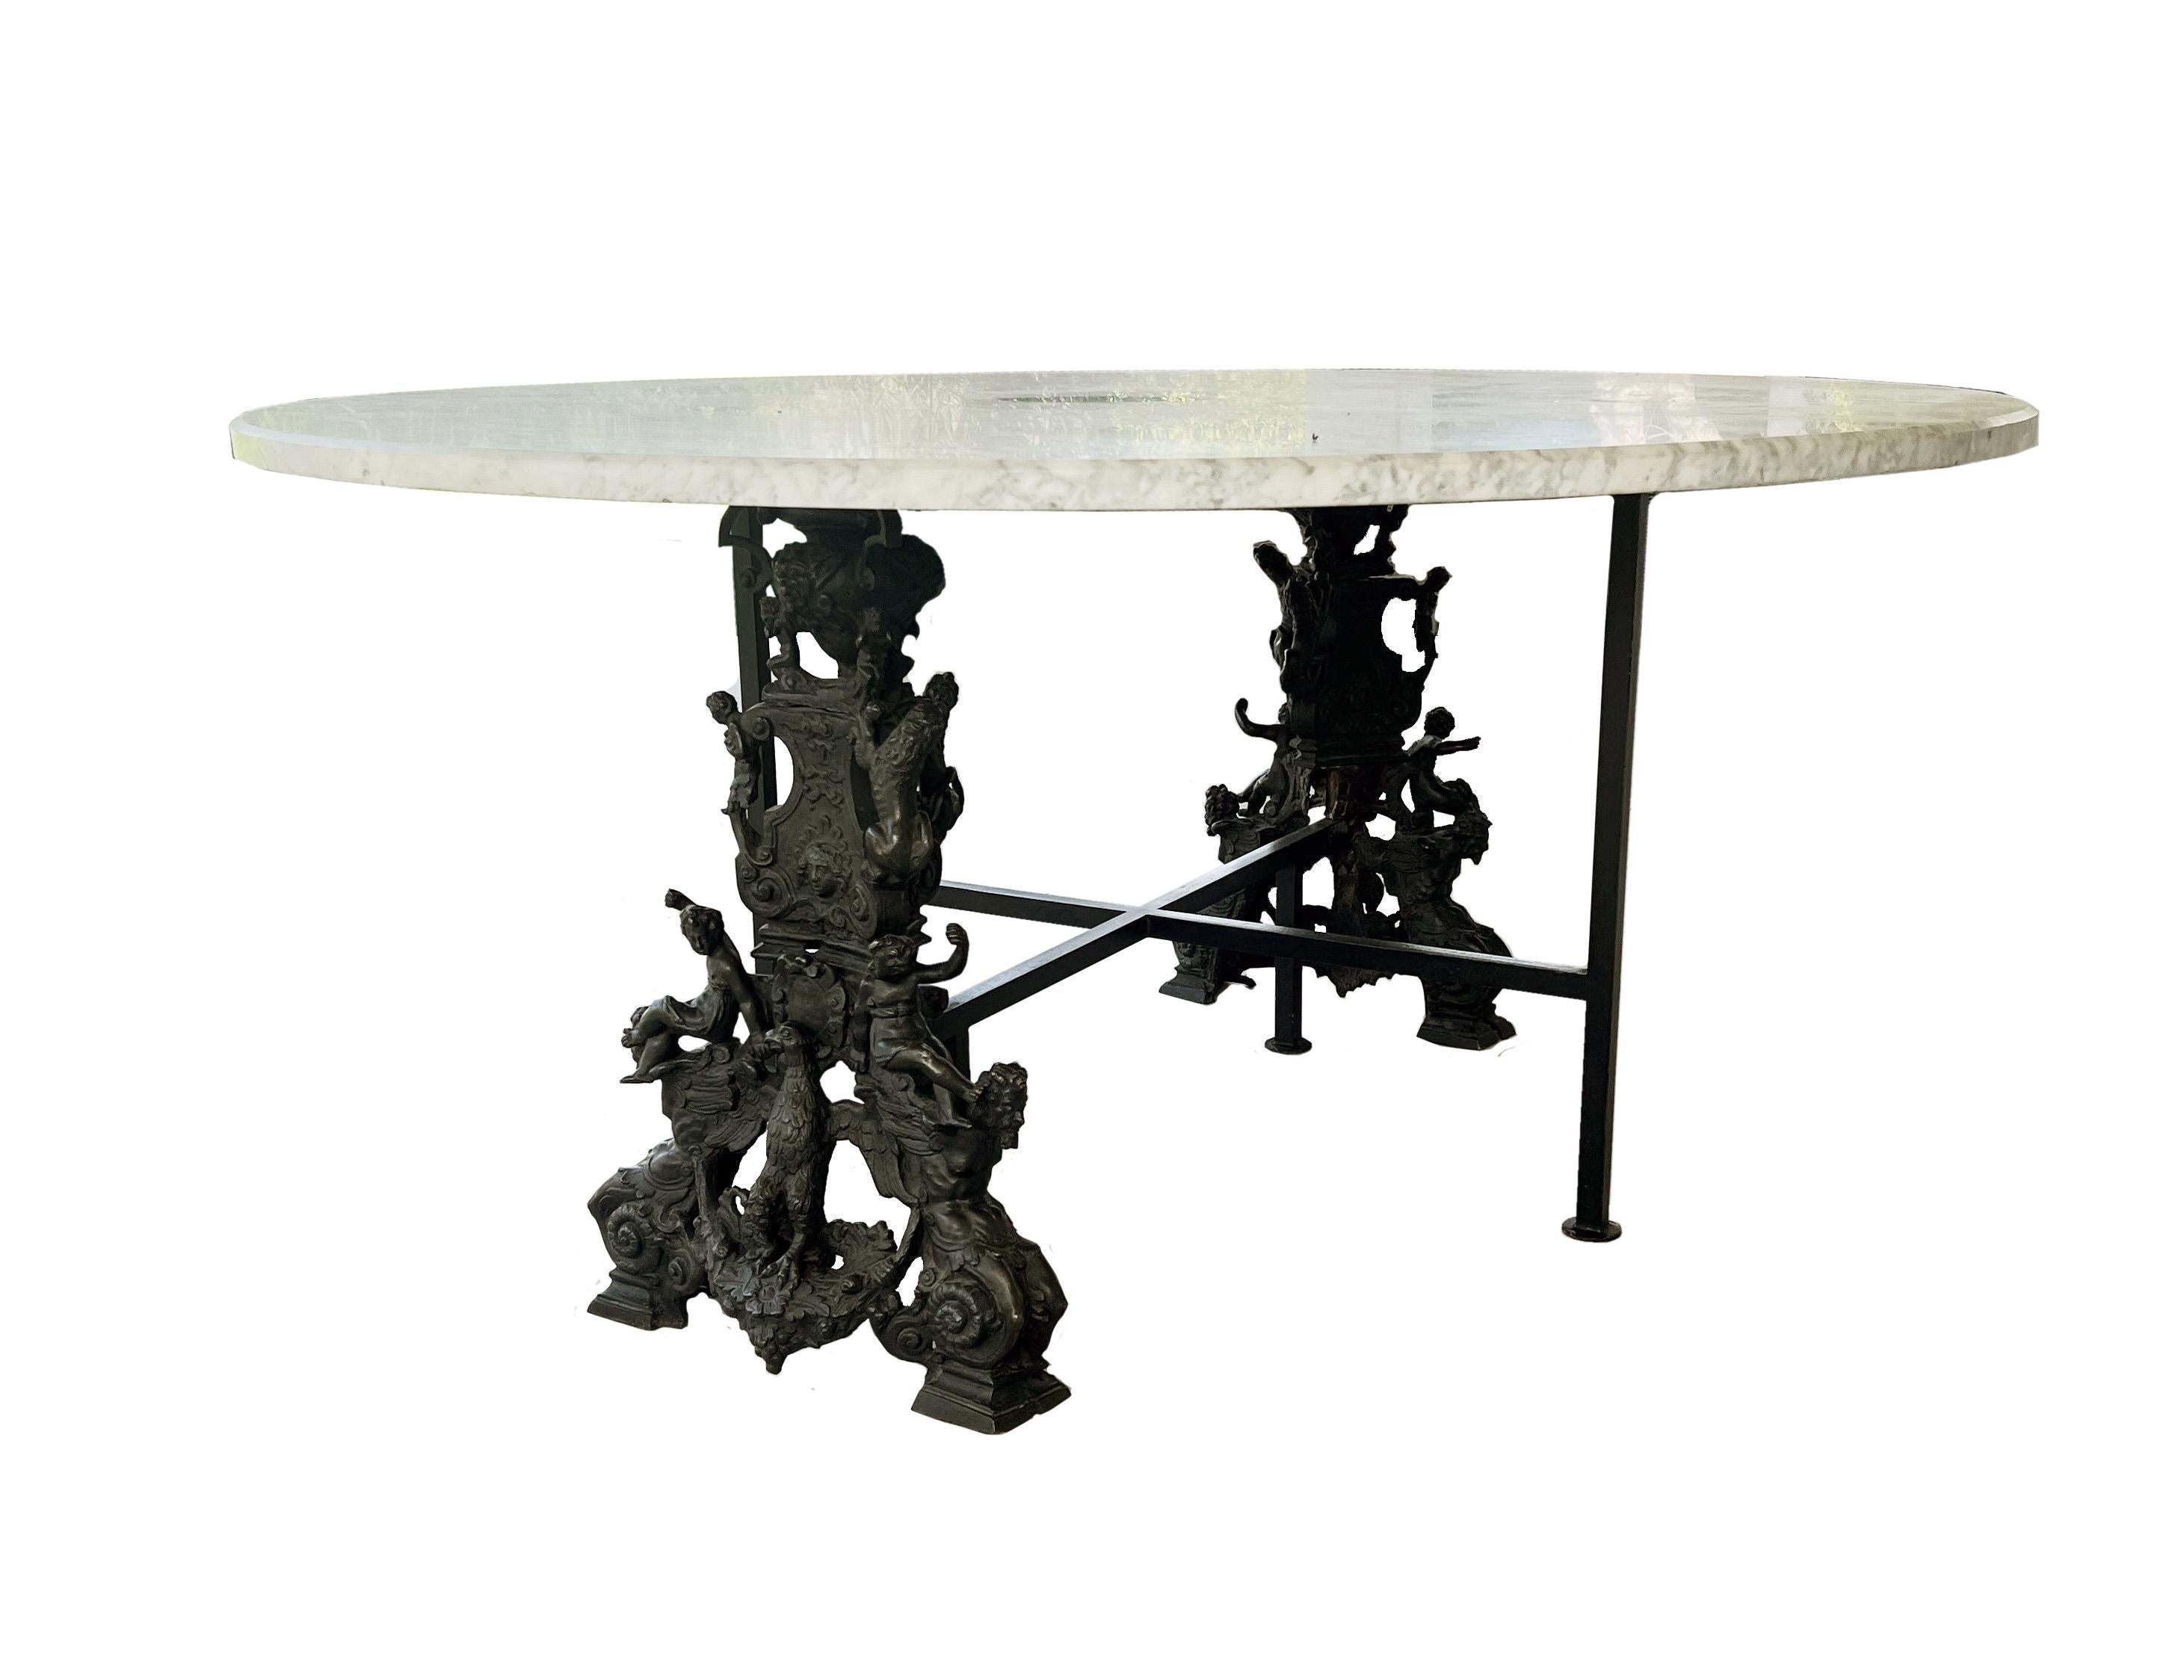 One-of-a-kind custom dining table, a true masterpiece of design and craftsmanship. Originating from the glamorous era of the 1960s Hollywood Regency style, this table boasts an unparalleled elegance and sophistication. The foundation of this